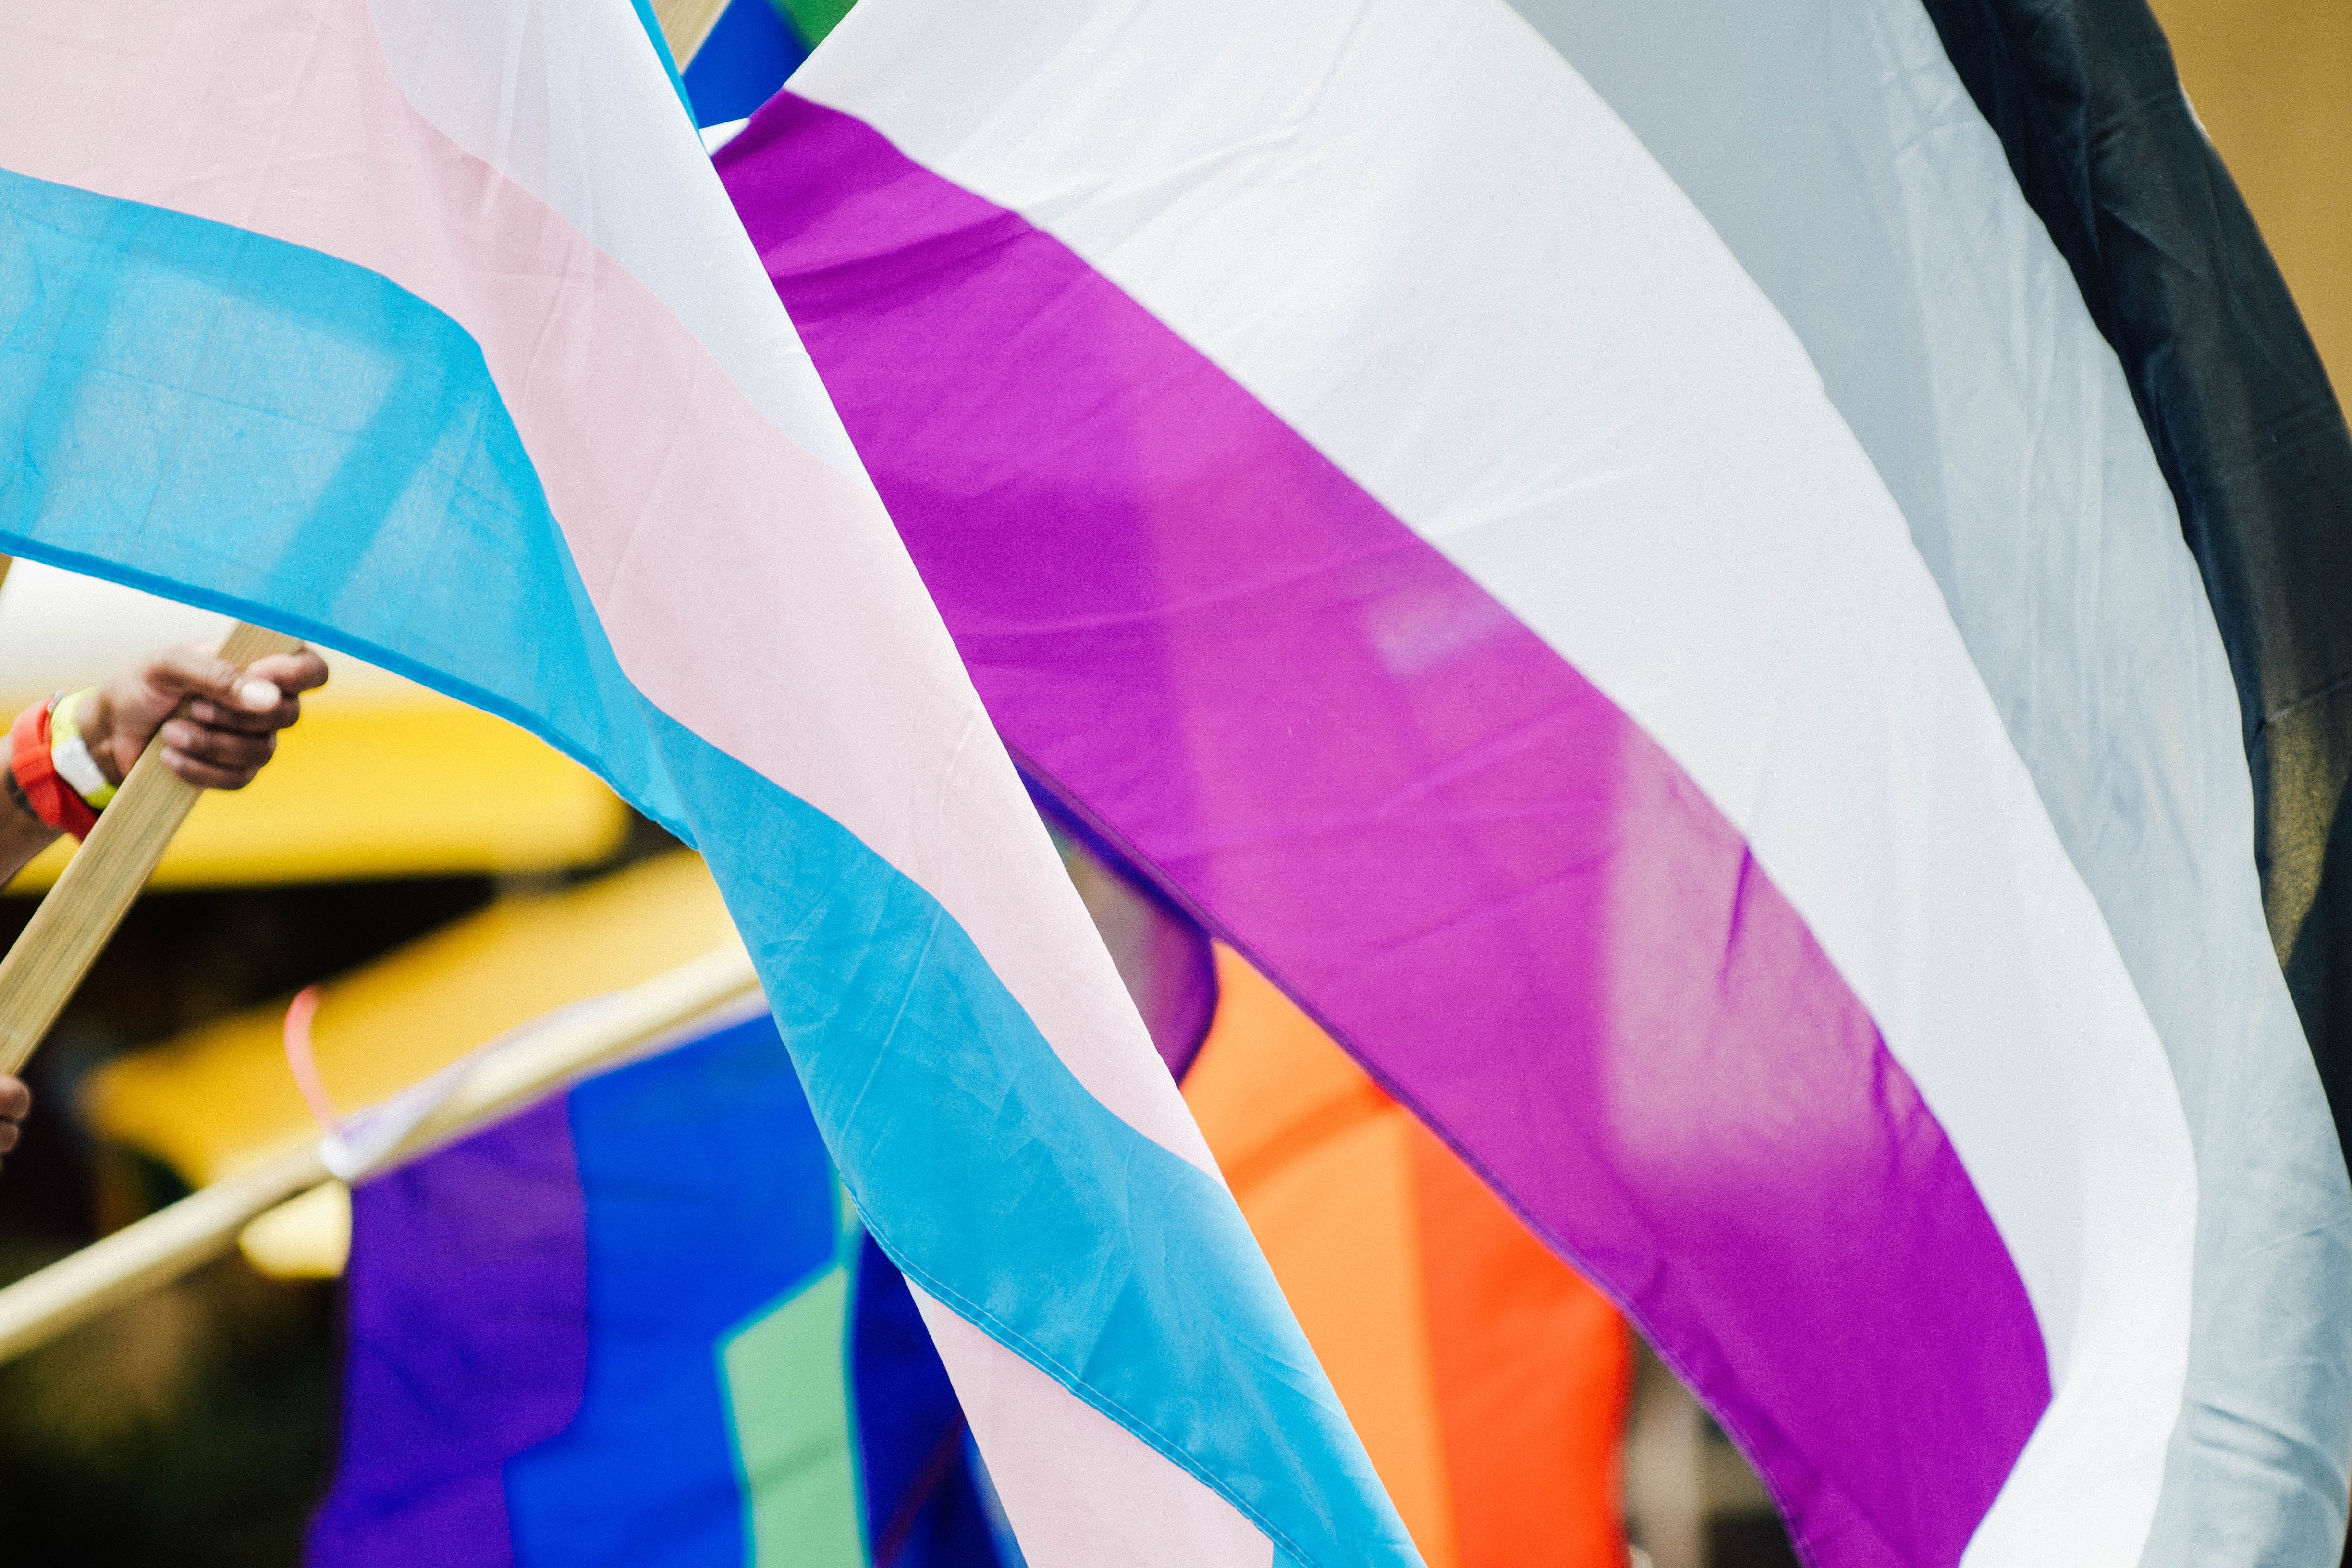 An asexuality pride flag along with other flags.